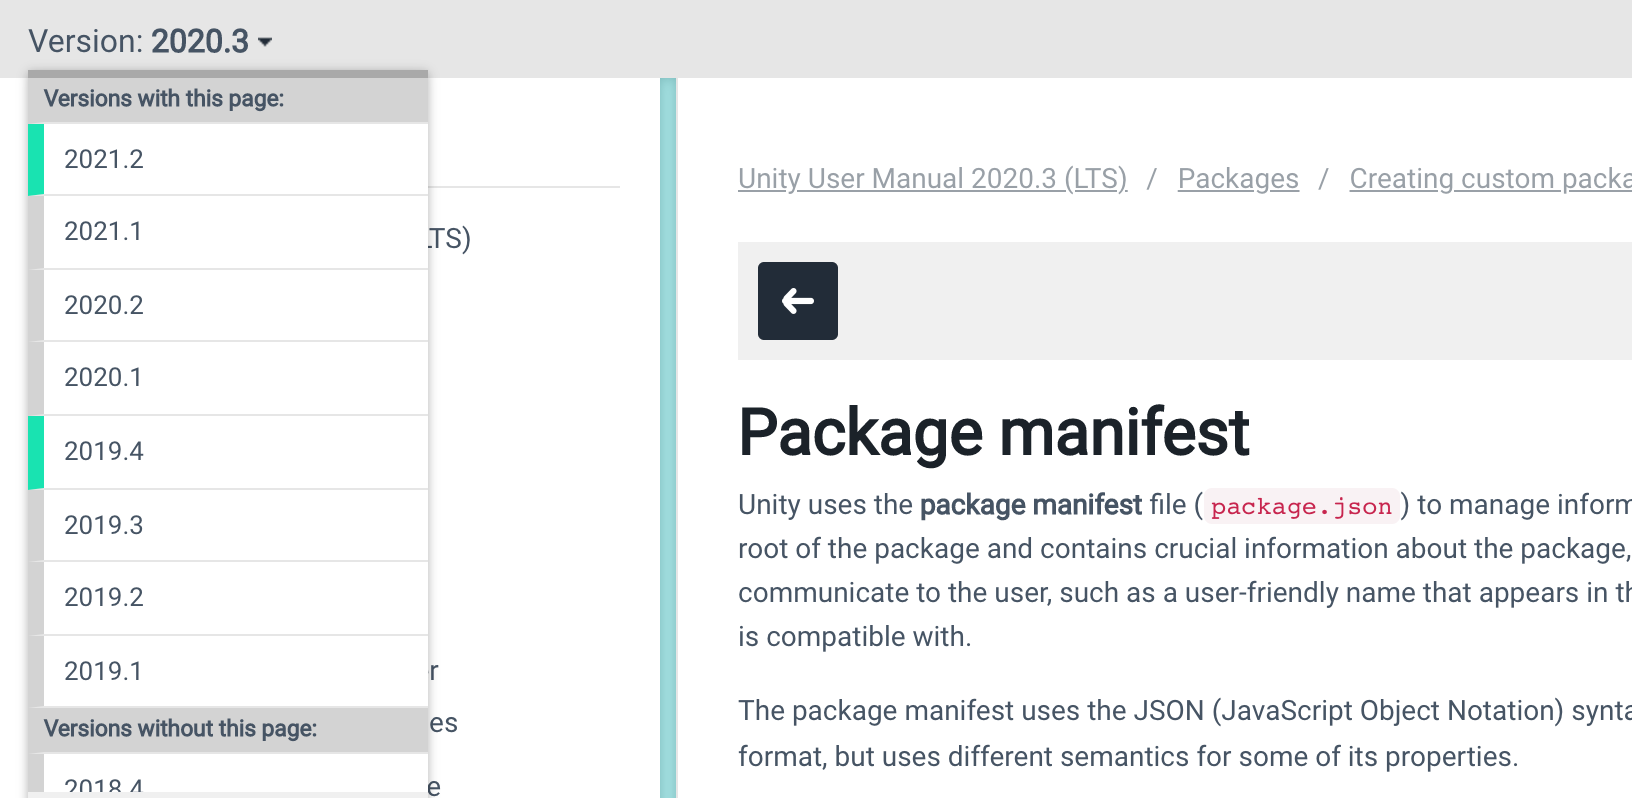 Publish Asset Store UPM package on which LTS version?